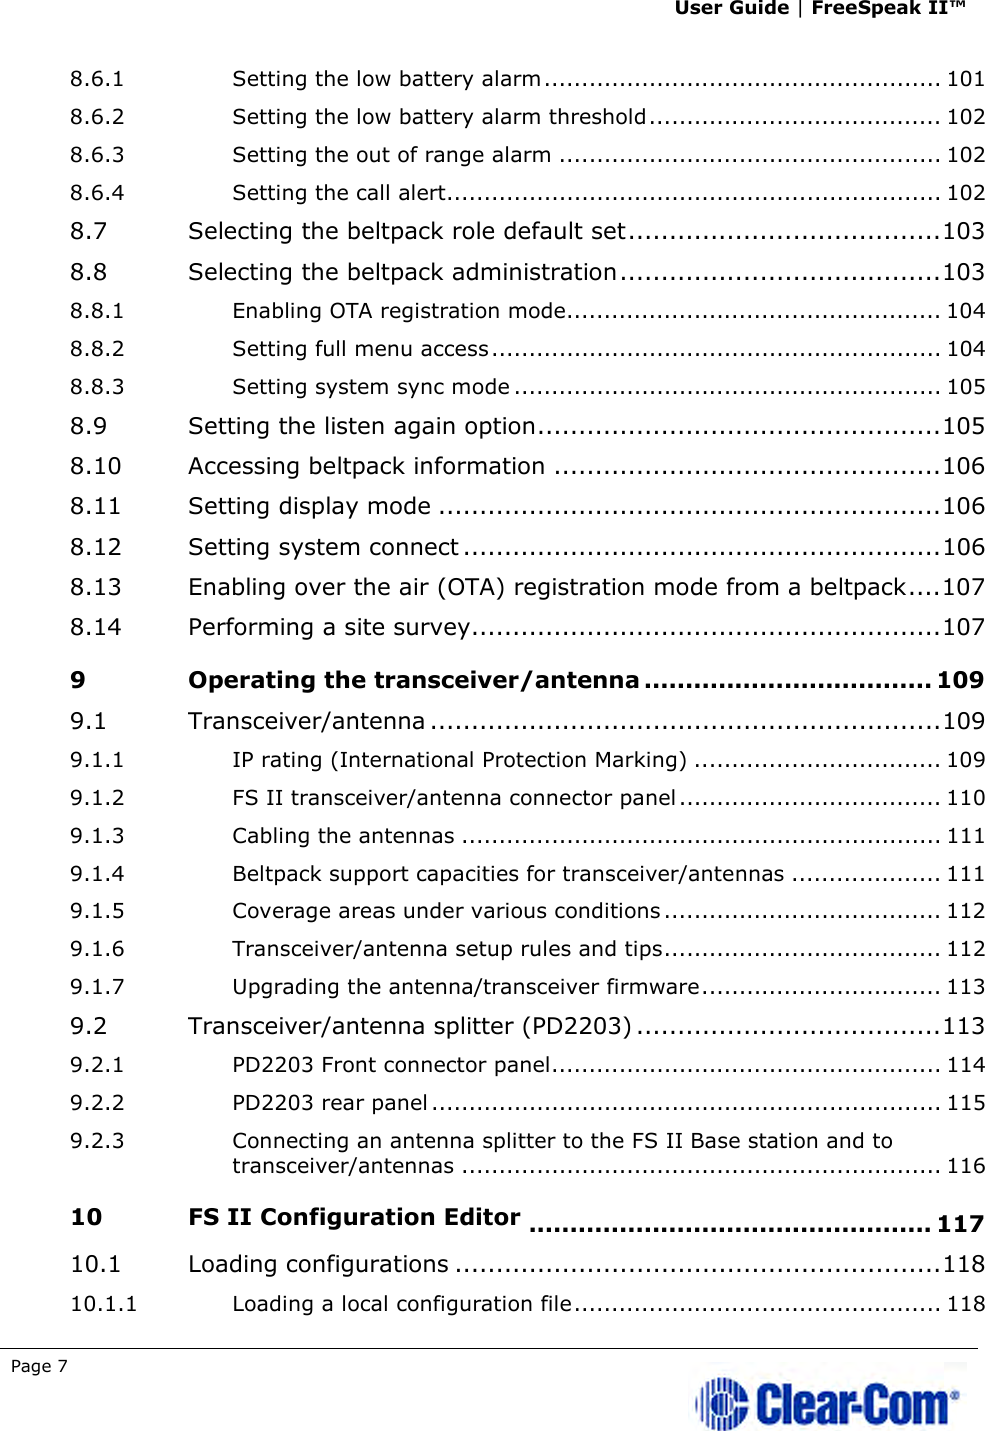 User Guide | FreeSpeak II™  Page 7   8.6.1 Setting the low battery alarm ..................................................... 101 8.6.2 Setting the low battery alarm threshold ....................................... 102 8.6.3 Setting the out of range alarm ................................................... 102 8.6.4 Setting the call alert .................................................................. 102 8.7 Selecting the beltpack role default set ...................................... 103 8.8 Selecting the beltpack administration ....................................... 103 8.8.1 Enabling OTA registration mode.................................................. 104 8.8.2 Setting full menu access ............................................................ 104 8.8.3 Setting system sync mode ......................................................... 105 8.9 Setting the listen again option ................................................. 105 8.10 Accessing beltpack information ............................................... 106 8.11 Setting display mode ............................................................. 106 8.12 Setting system connect .......................................................... 106 8.13 Enabling over the air (OTA) registration mode from a beltpack .... 107 8.14 Performing a site survey ......................................................... 107 9 Operating the transceiver/antenna ................................... 109 9.1 Transceiver/antenna .............................................................. 109 9.1.1 IP rating (International Protection Marking) ................................. 109 9.1.2 FS II transceiver/antenna connector panel ................................... 110 9.1.3 Cabling the antennas ................................................................ 111 9.1.4 Beltpack support capacities for transceiver/antennas .................... 111 9.1.5 Coverage areas under various conditions ..................................... 112 9.1.6 Transceiver/antenna setup rules and tips ..................................... 112 9.1.7 Upgrading the antenna/transceiver firmware ................................ 113 9.2 Transceiver/antenna splitter (PD2203) ..................................... 113 9.2.1 PD2203 Front connector panel .................................................... 114 9.2.2 PD2203 rear panel .................................................................... 115 9.2.3 Connecting an antenna splitter to the FS II Base station and to transceiver/antennas ................................................................ 116 10 FS II Configuration Editor ................................................. 117 10.1 Loading configurations ........................................................... 118 10.1.1 Loading a local configuration file ................................................. 118 